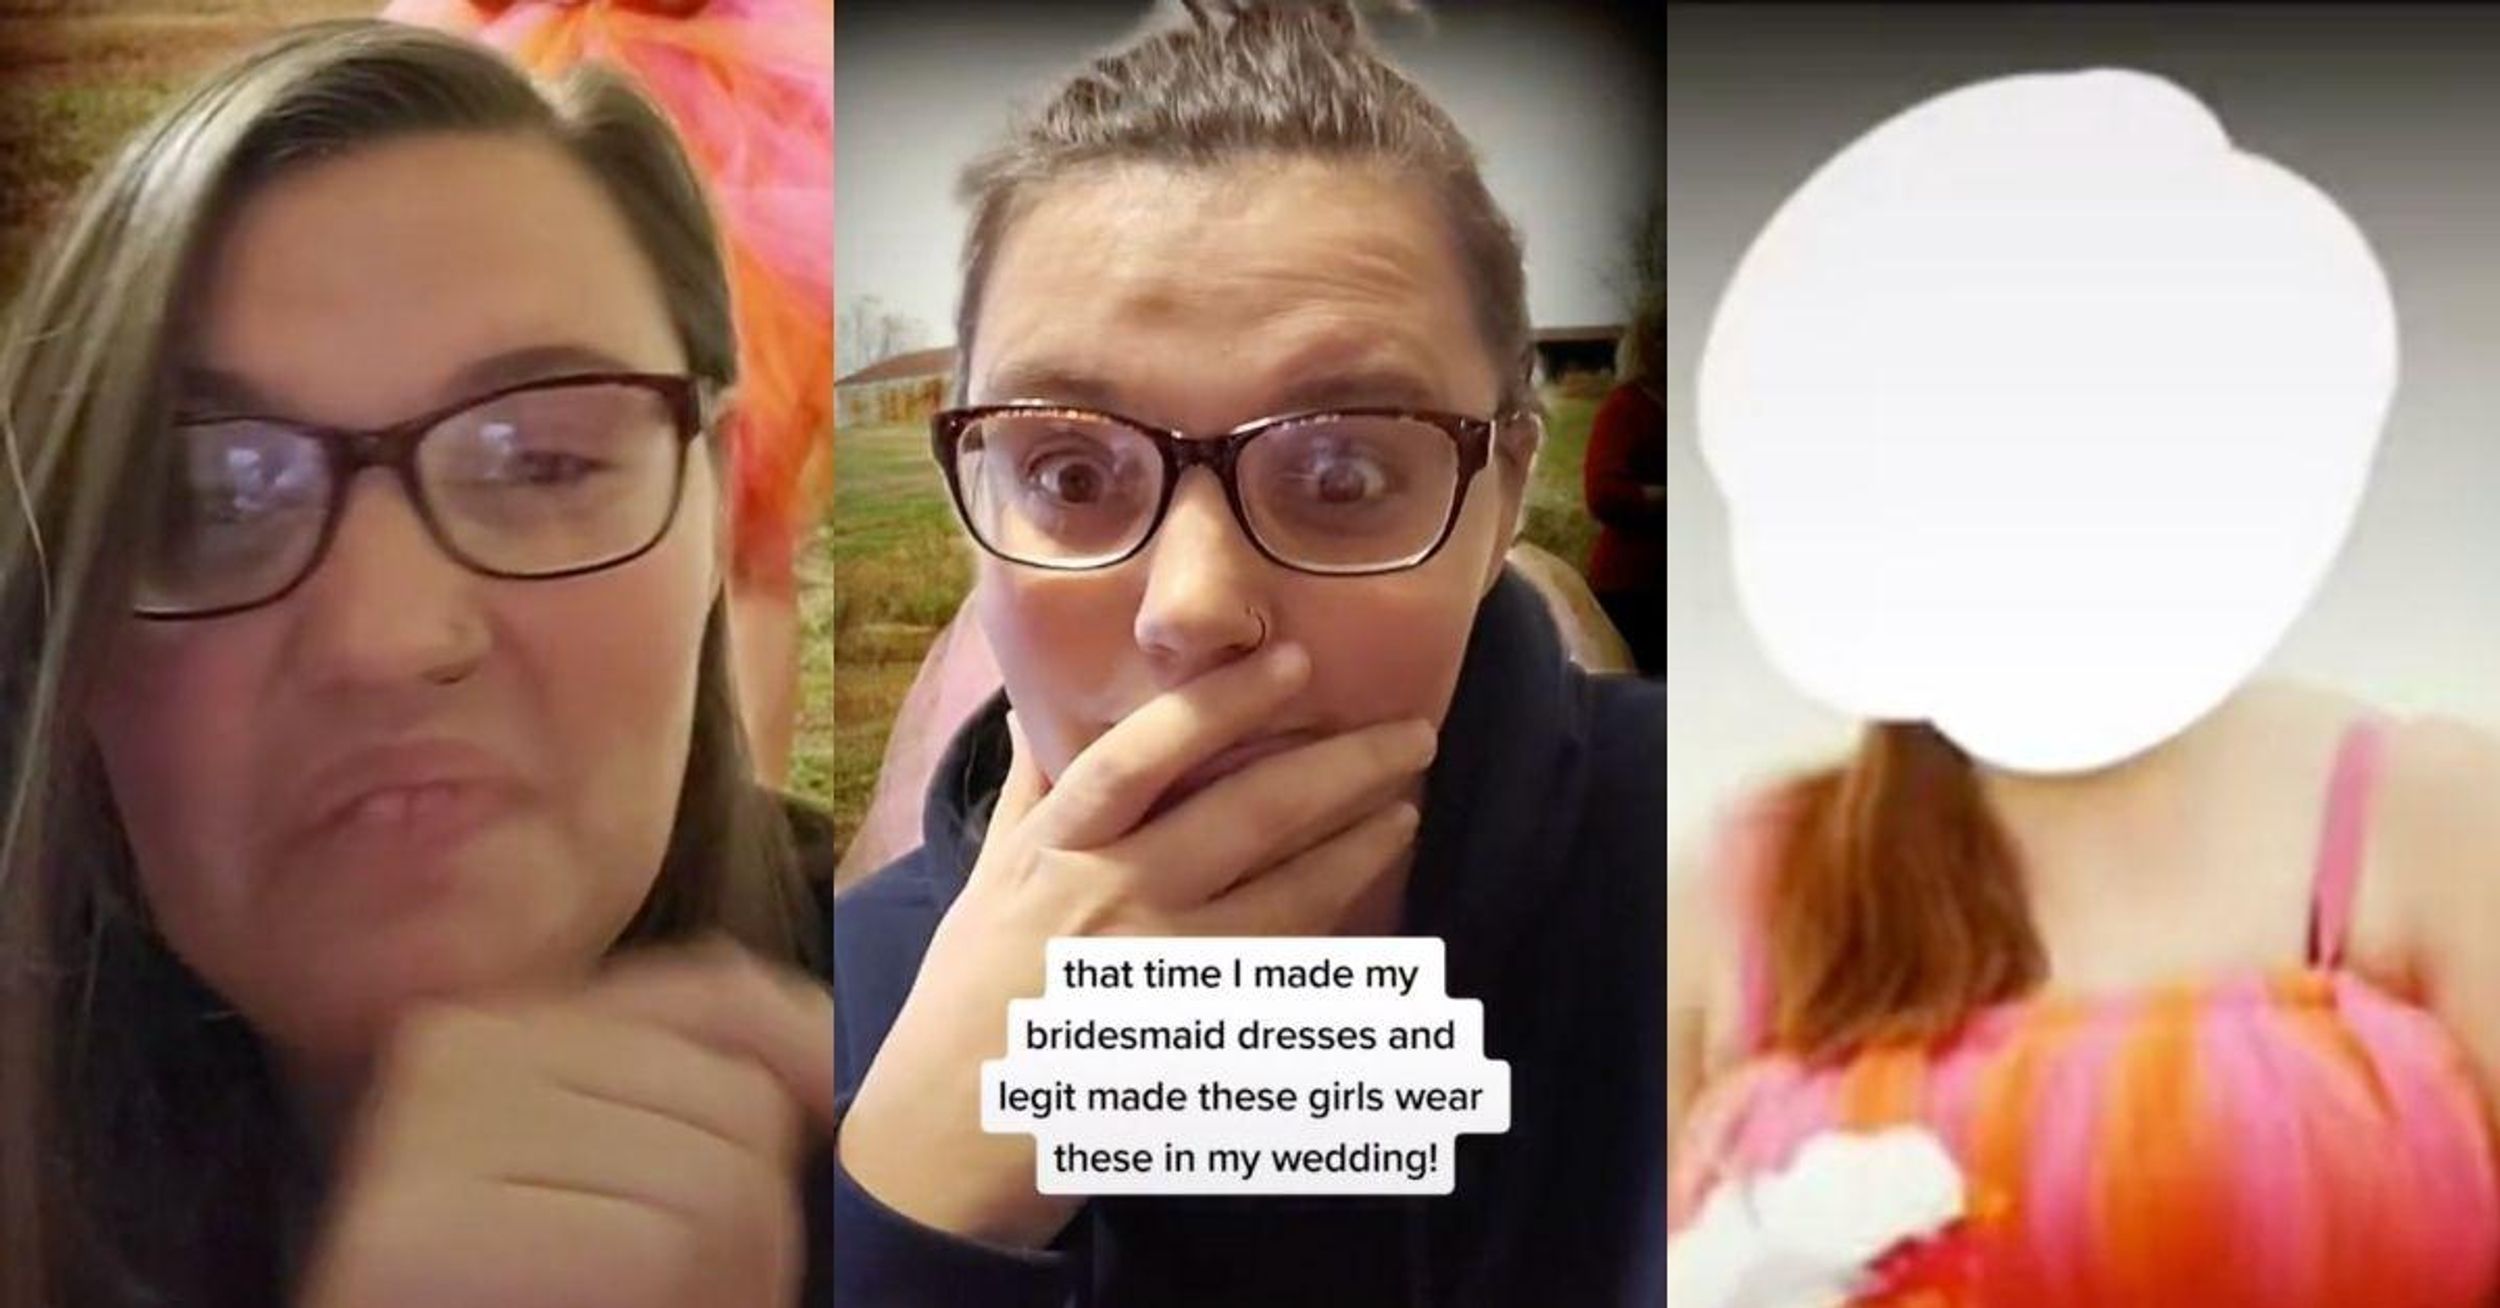 Woman Mortified After Making Dresses For Her Bridesmaids That Were 'So Bad' She Was Stunned They Wore Them